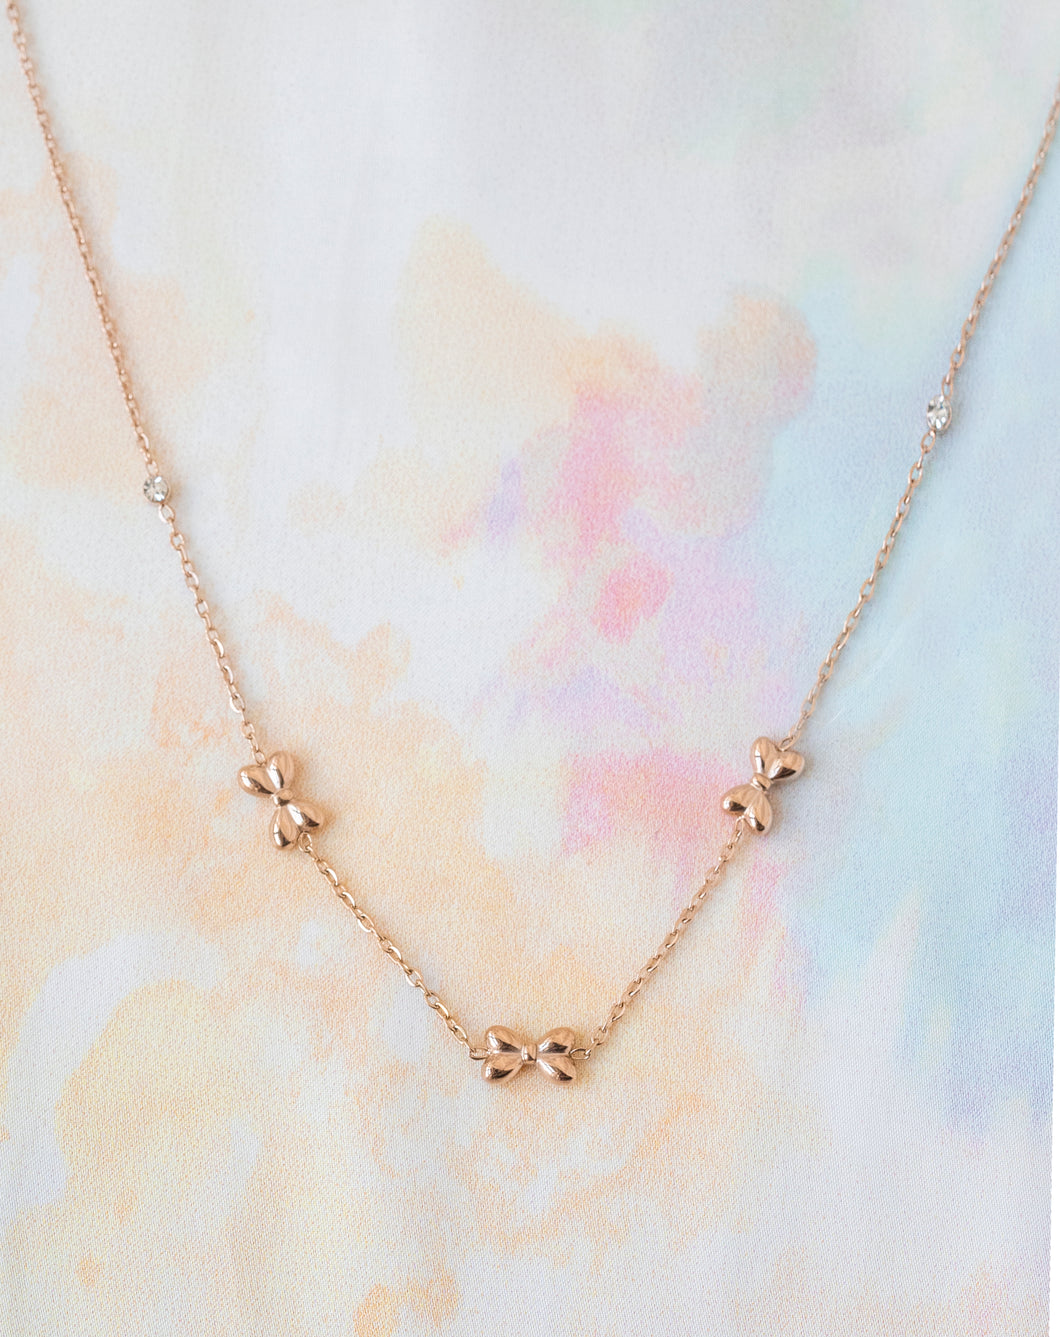 Bow Trio Necklace/Choker - 18K Rose Gold Plated